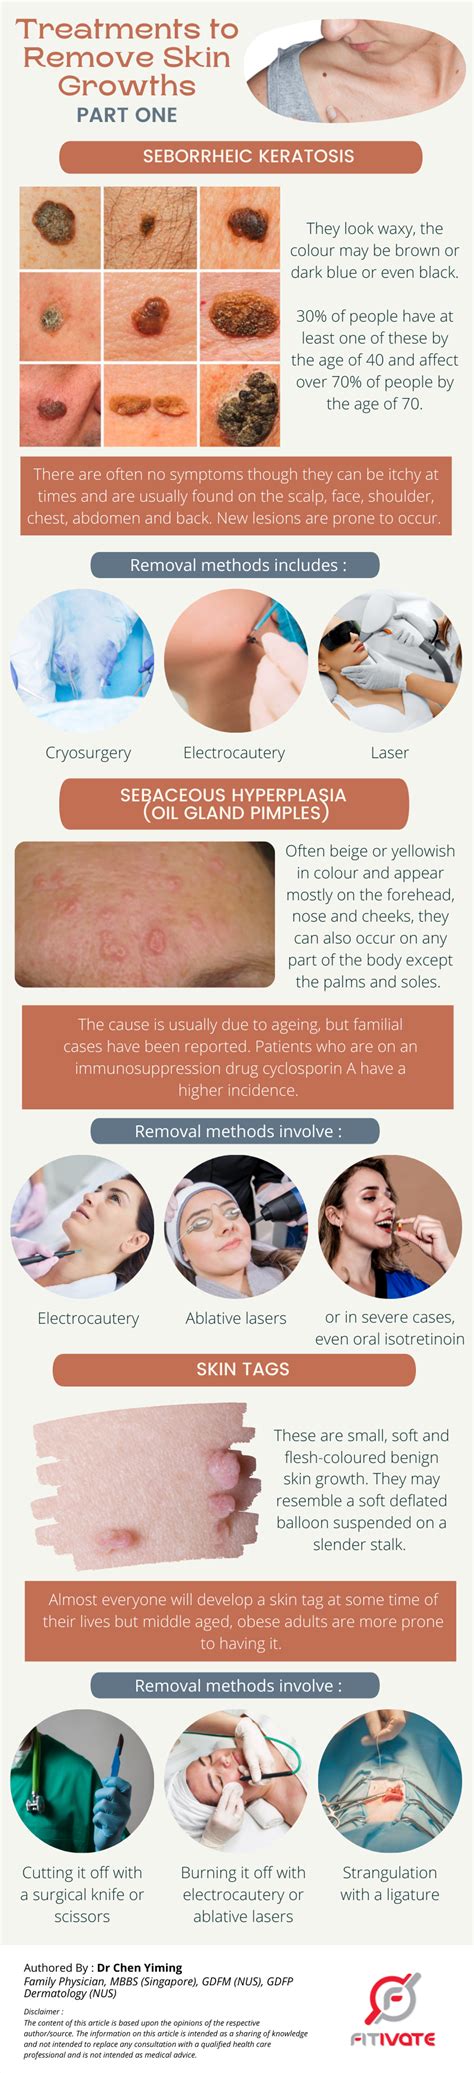 Treatments To Remove Growths On Skin Part 1